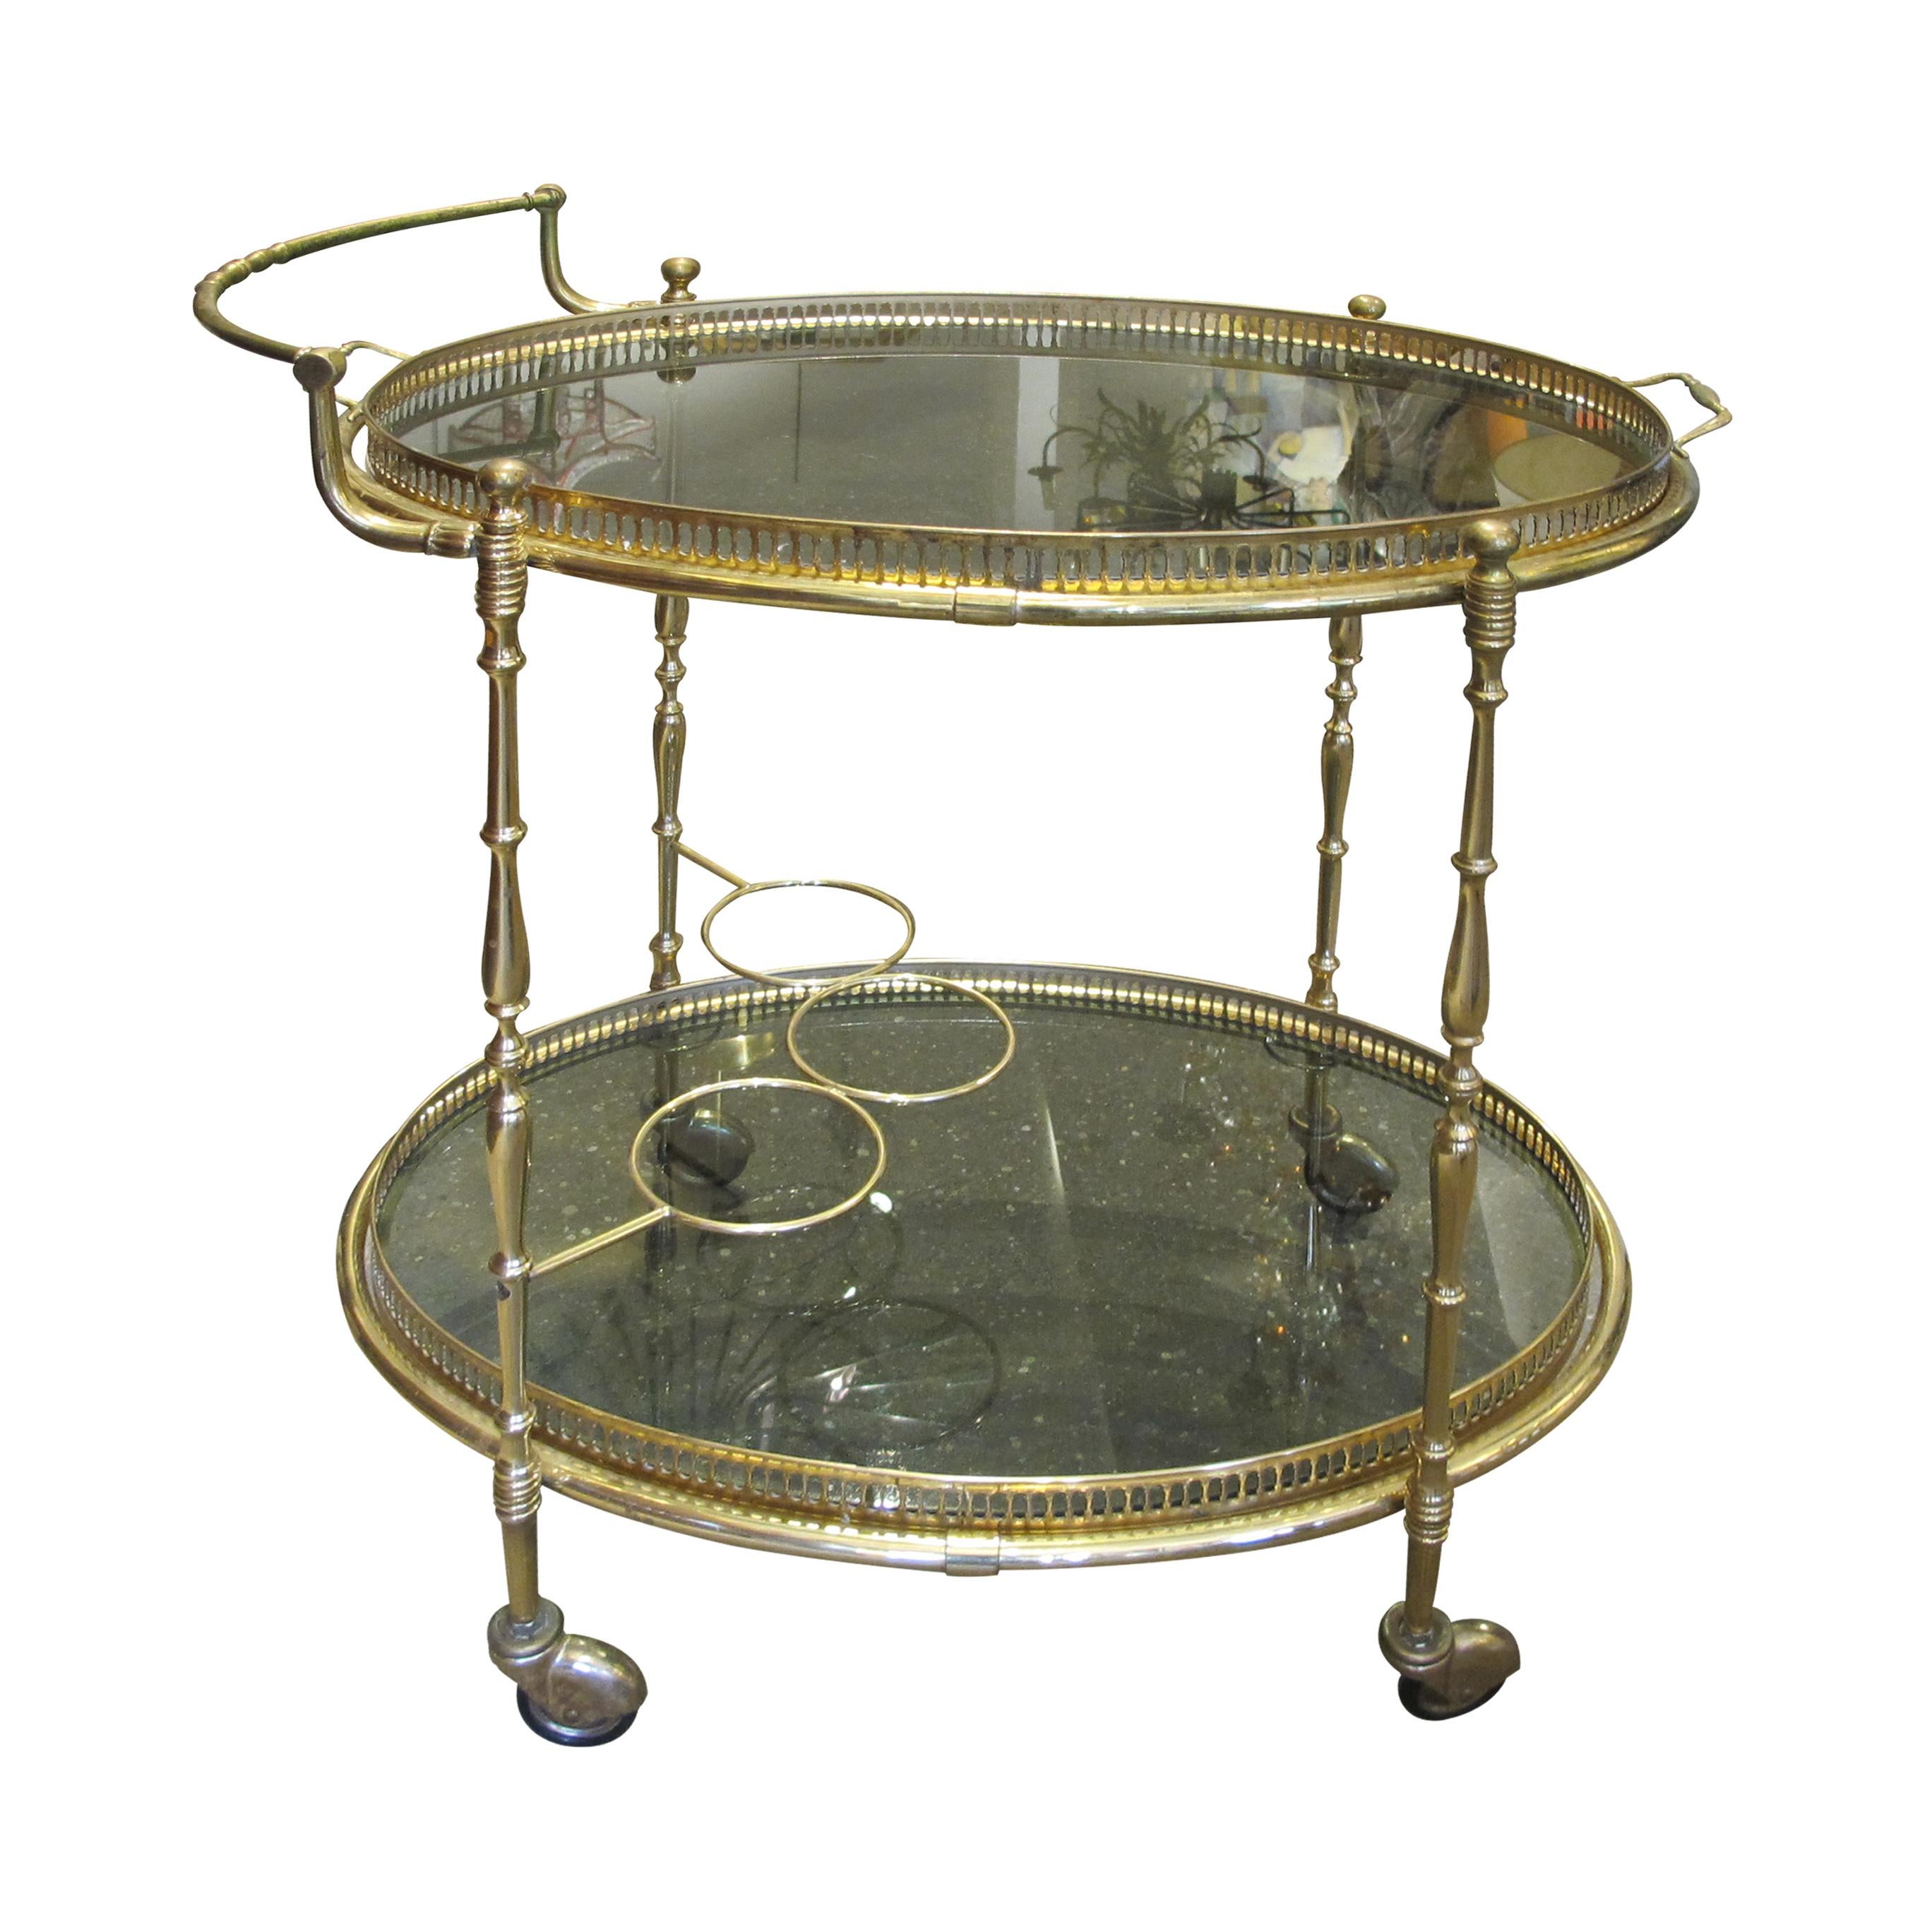 1970s well-made brass serving two-tier bar cart/trolley in good condition presented on four directional wheels. The original smoked glass is typical from the mid-century period, the top tier is a removable tray with brass handles. 

Size: H62 cm x